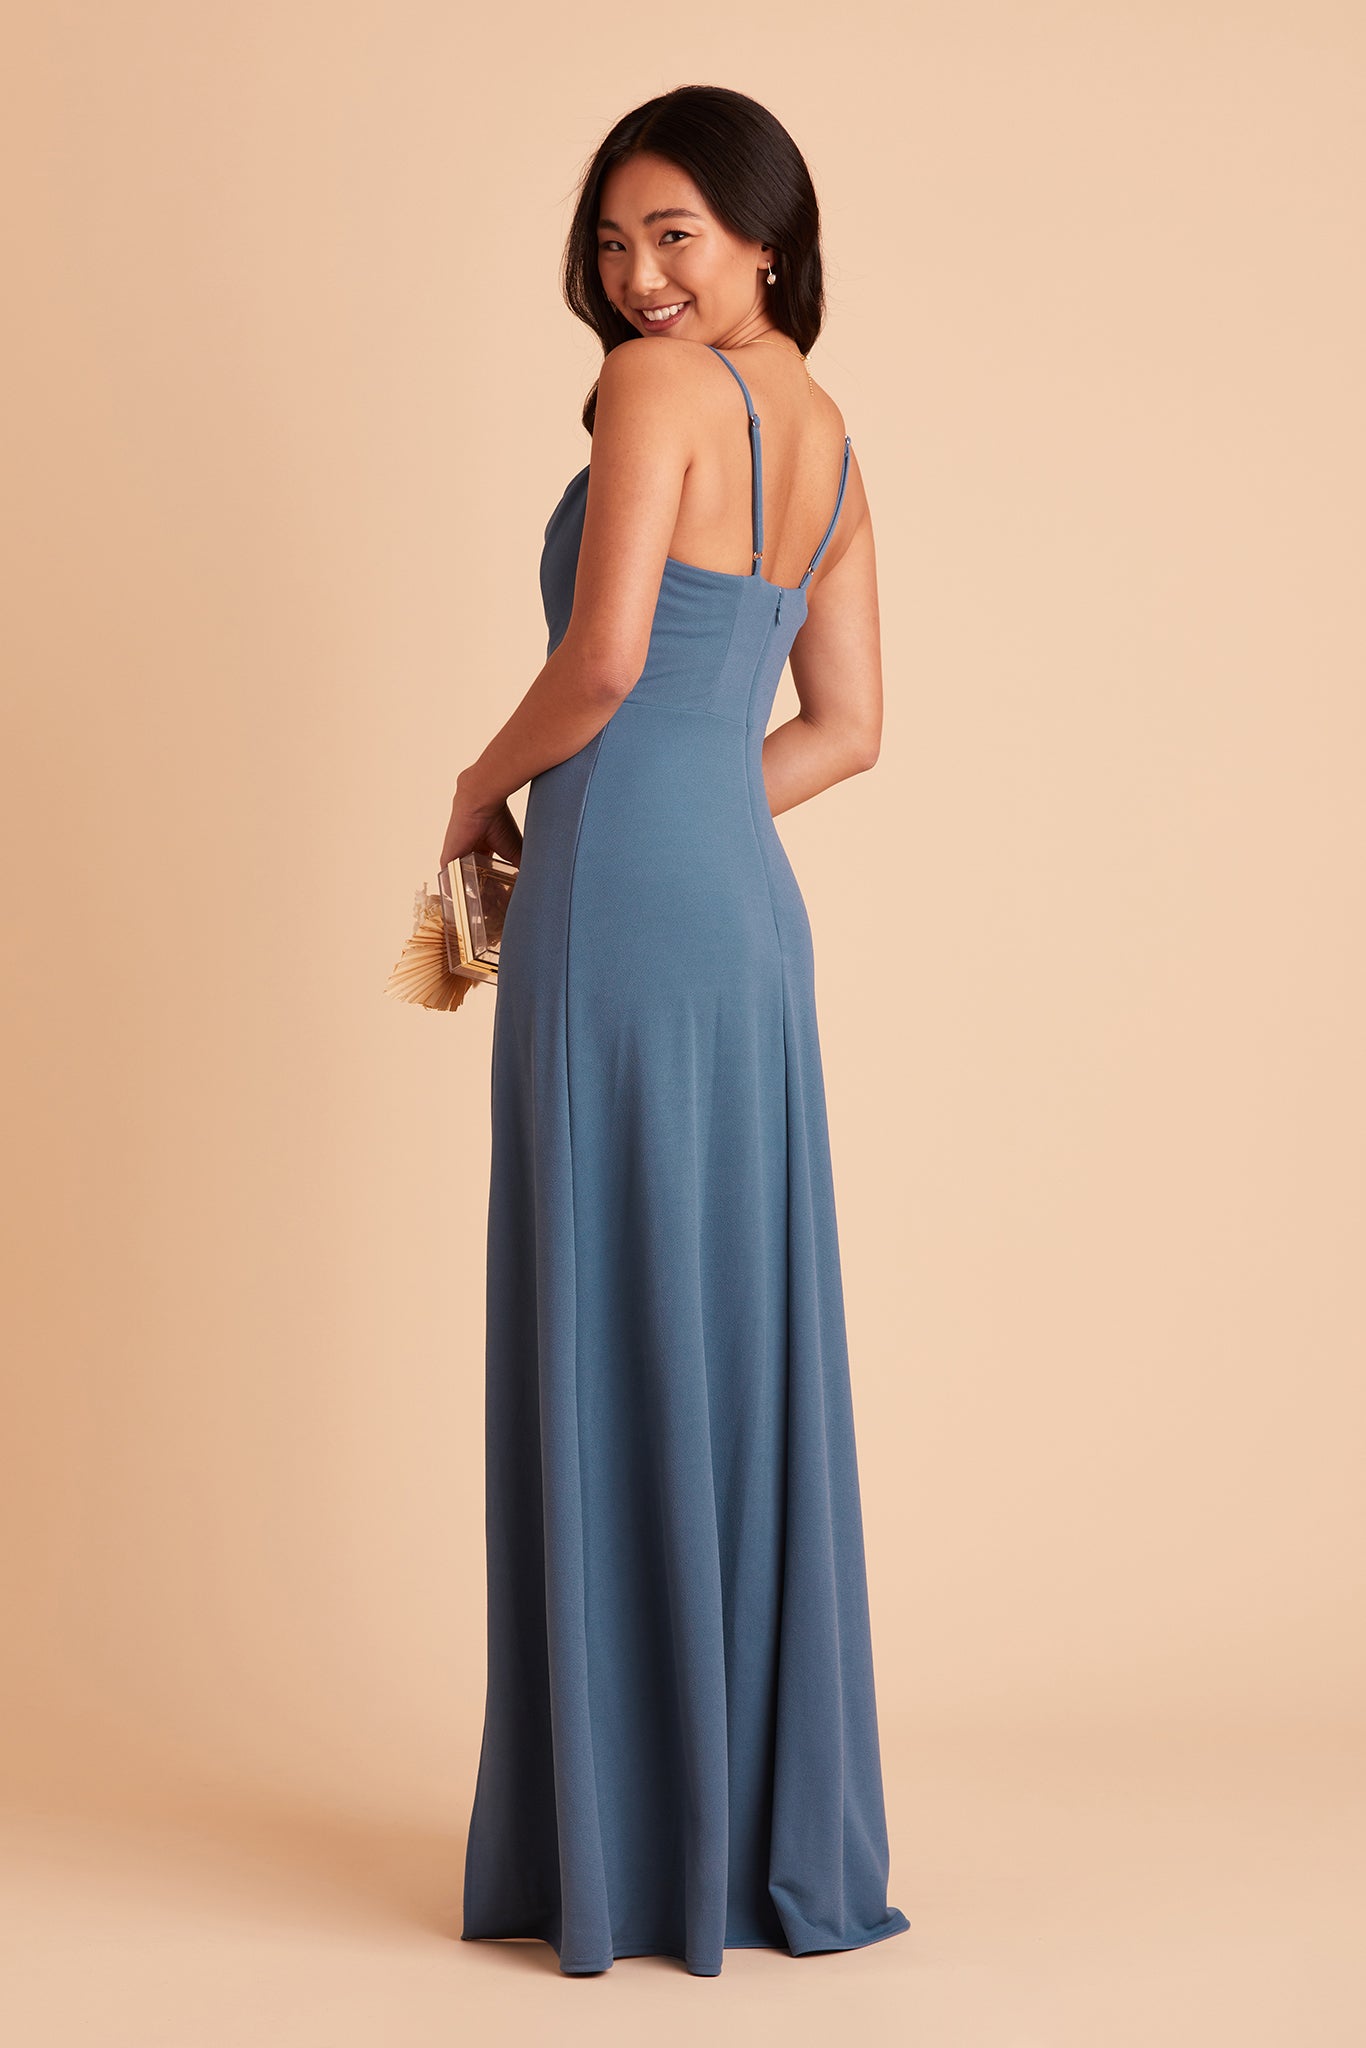 Ash bridesmaid dress in twilight blue crepe by Birdy Grey, side view